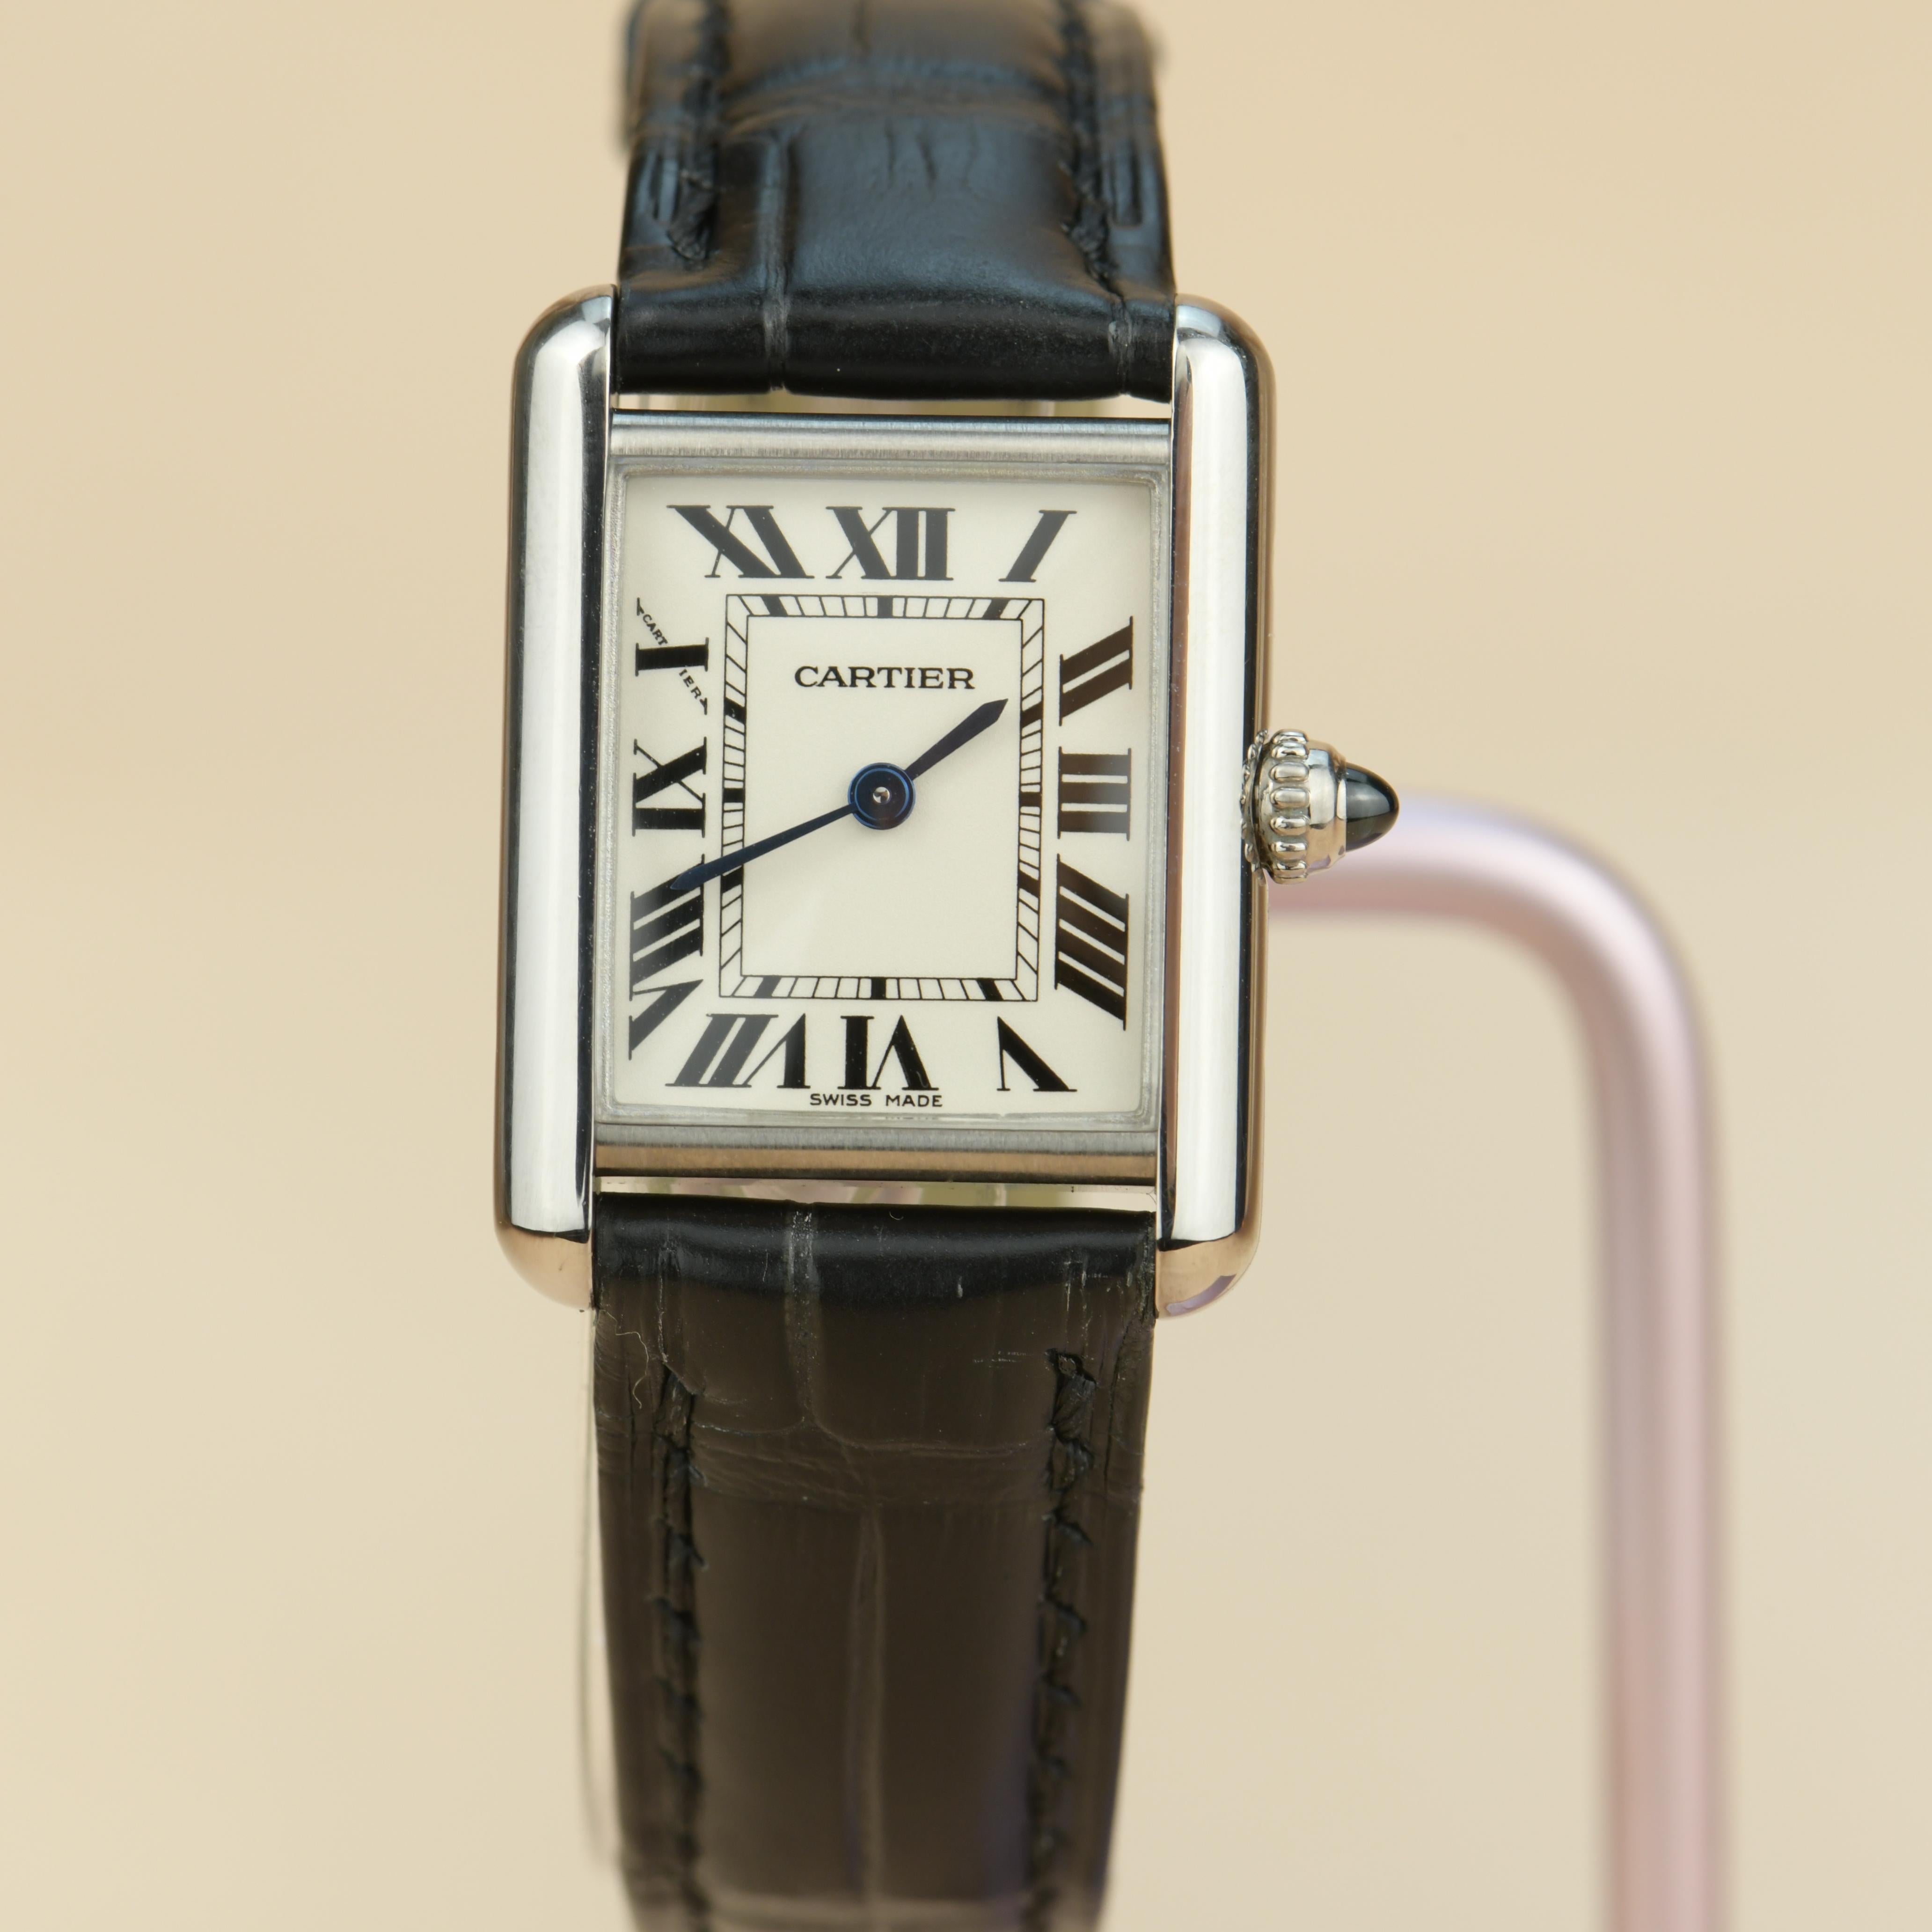 Dandelion Antiques Code	  AT-0886
Brand	                                  Cartier
Model No.	                          W1541056
Retail Price                                £8,050 / $11200
____________________________________

Date	                   